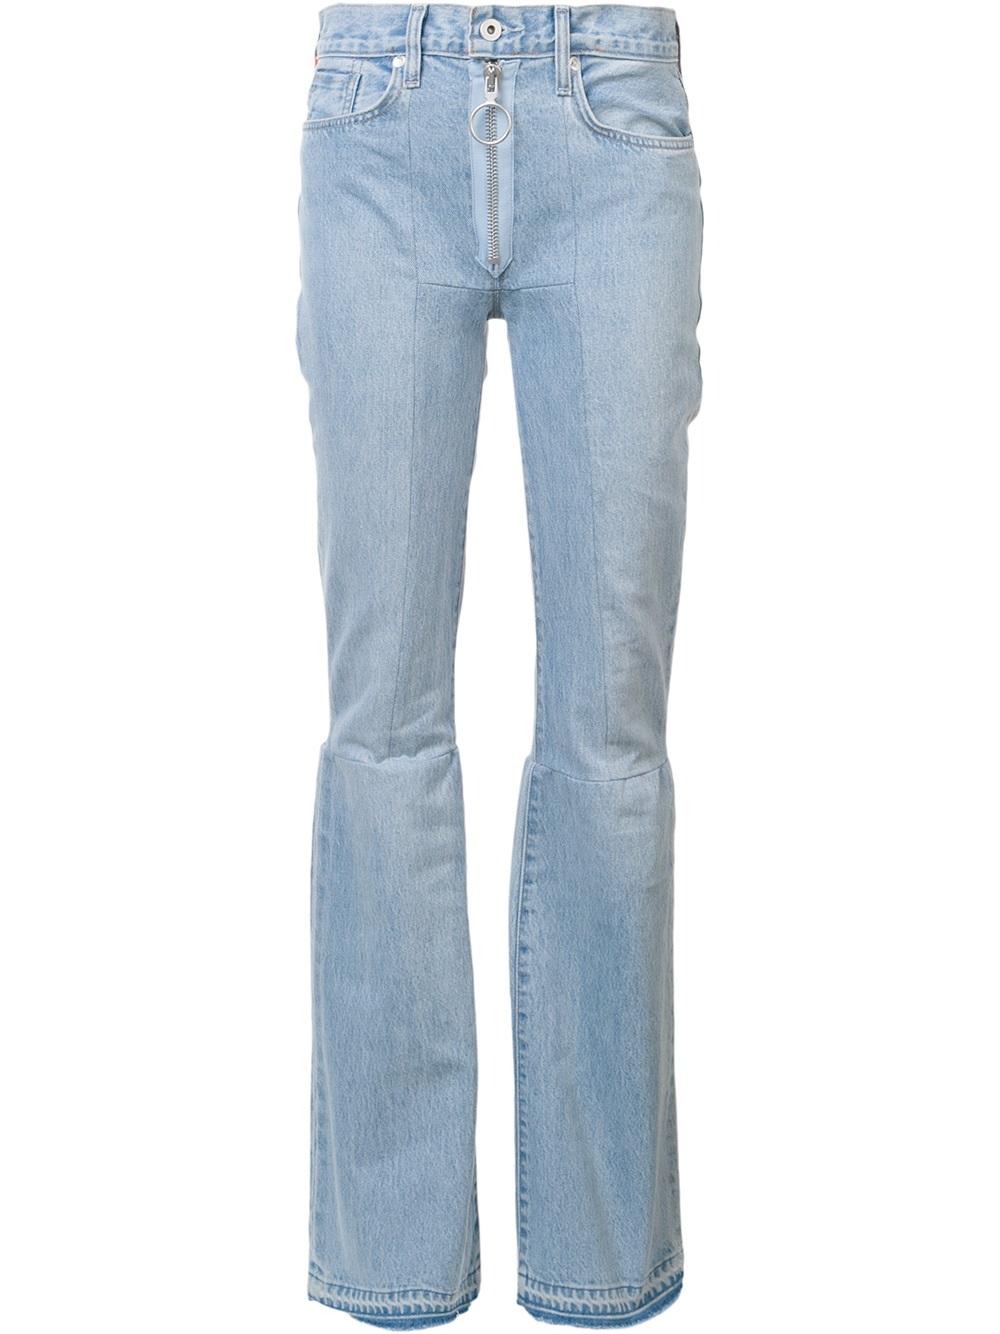 Off-White flared jeans 7300 VINTAGE WASH Women Clothing